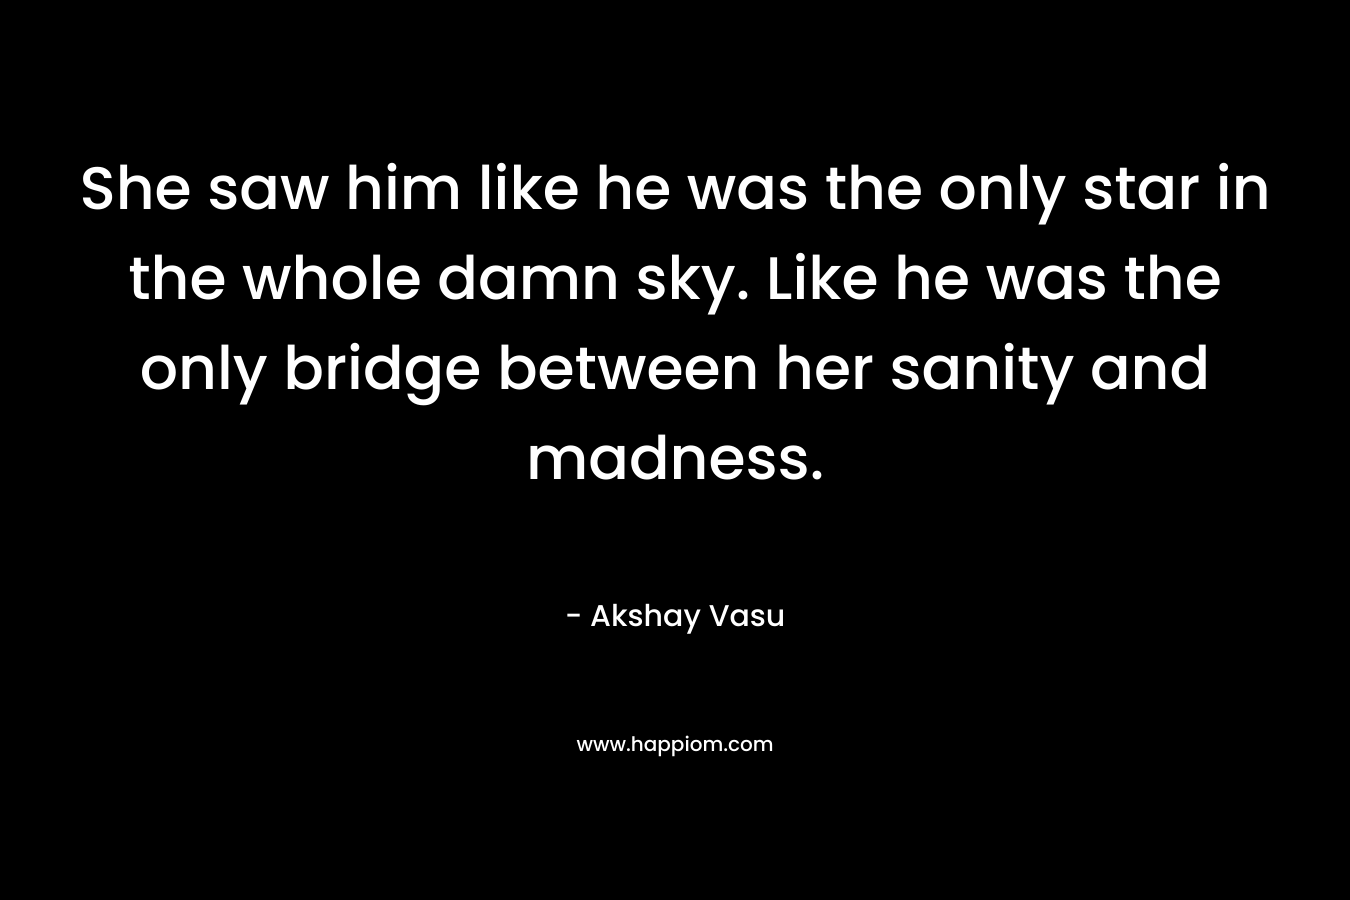 She saw him like he was the only star in the whole damn sky. Like he was the only bridge between her sanity and madness.